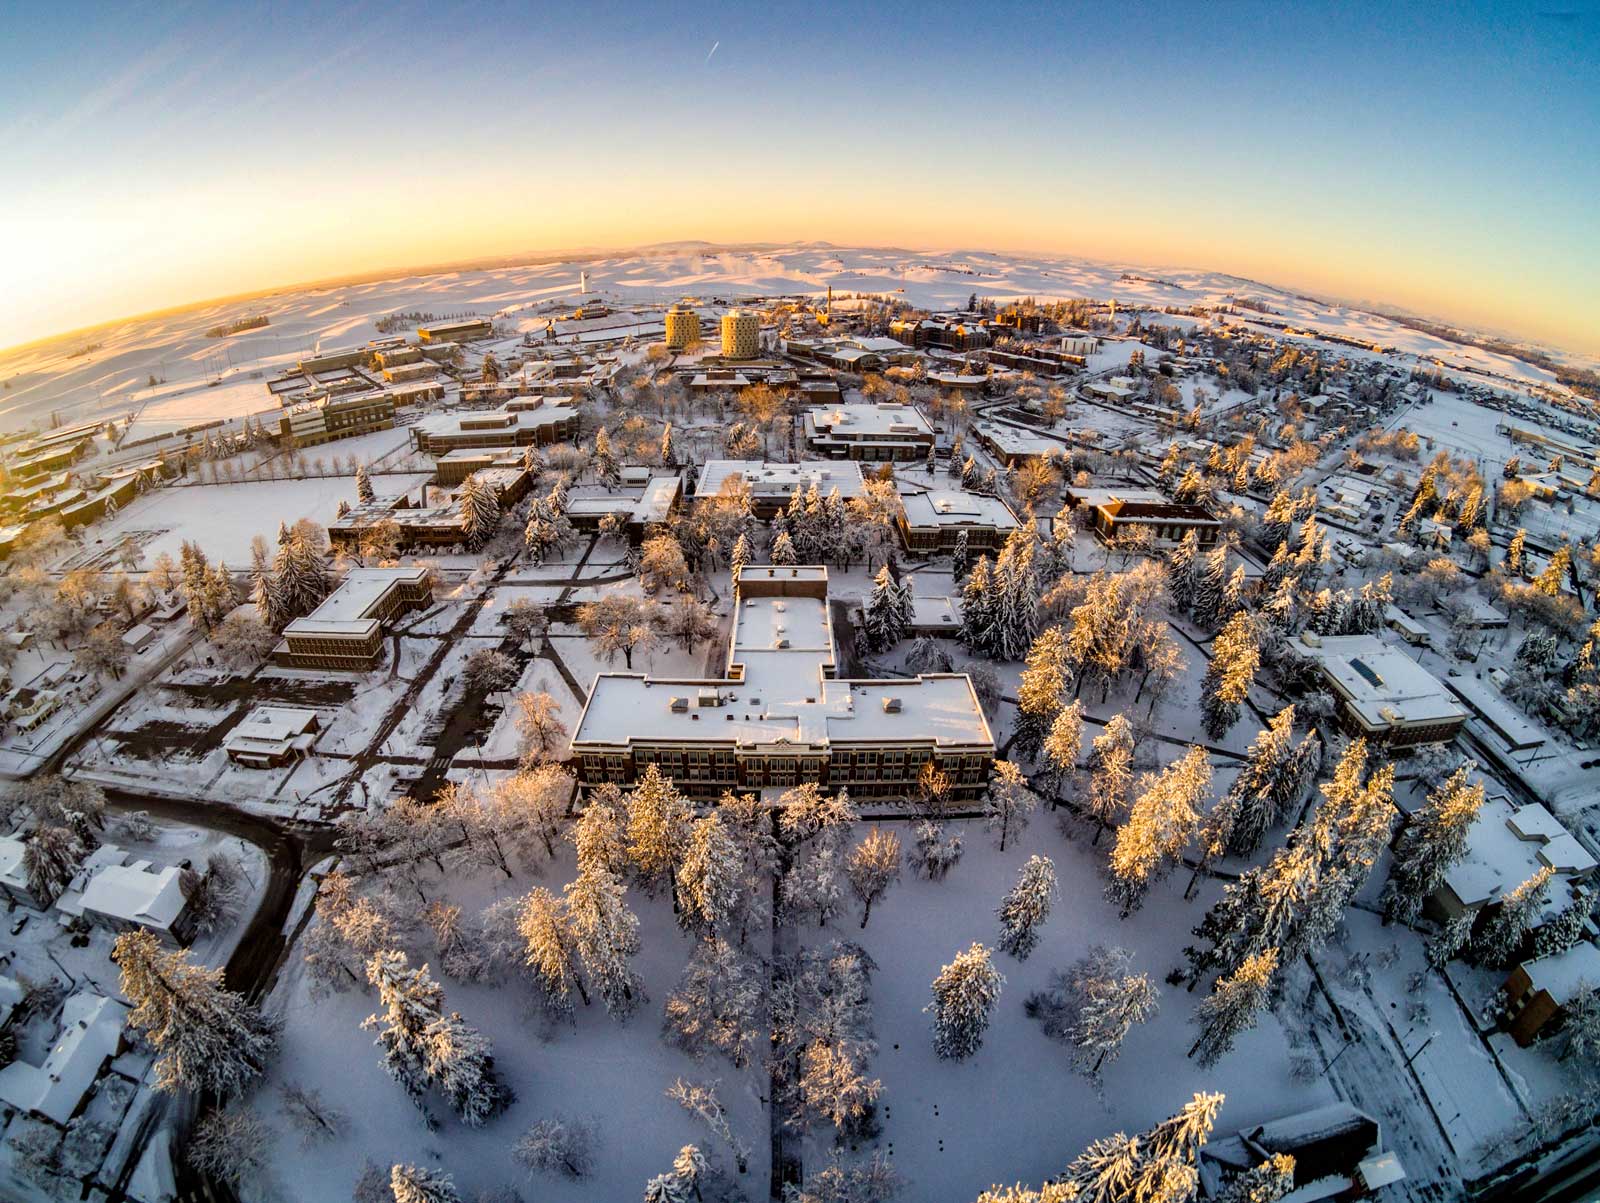 Aerial view of the EWU Cheney campus covered in fresh snow under a clear sky